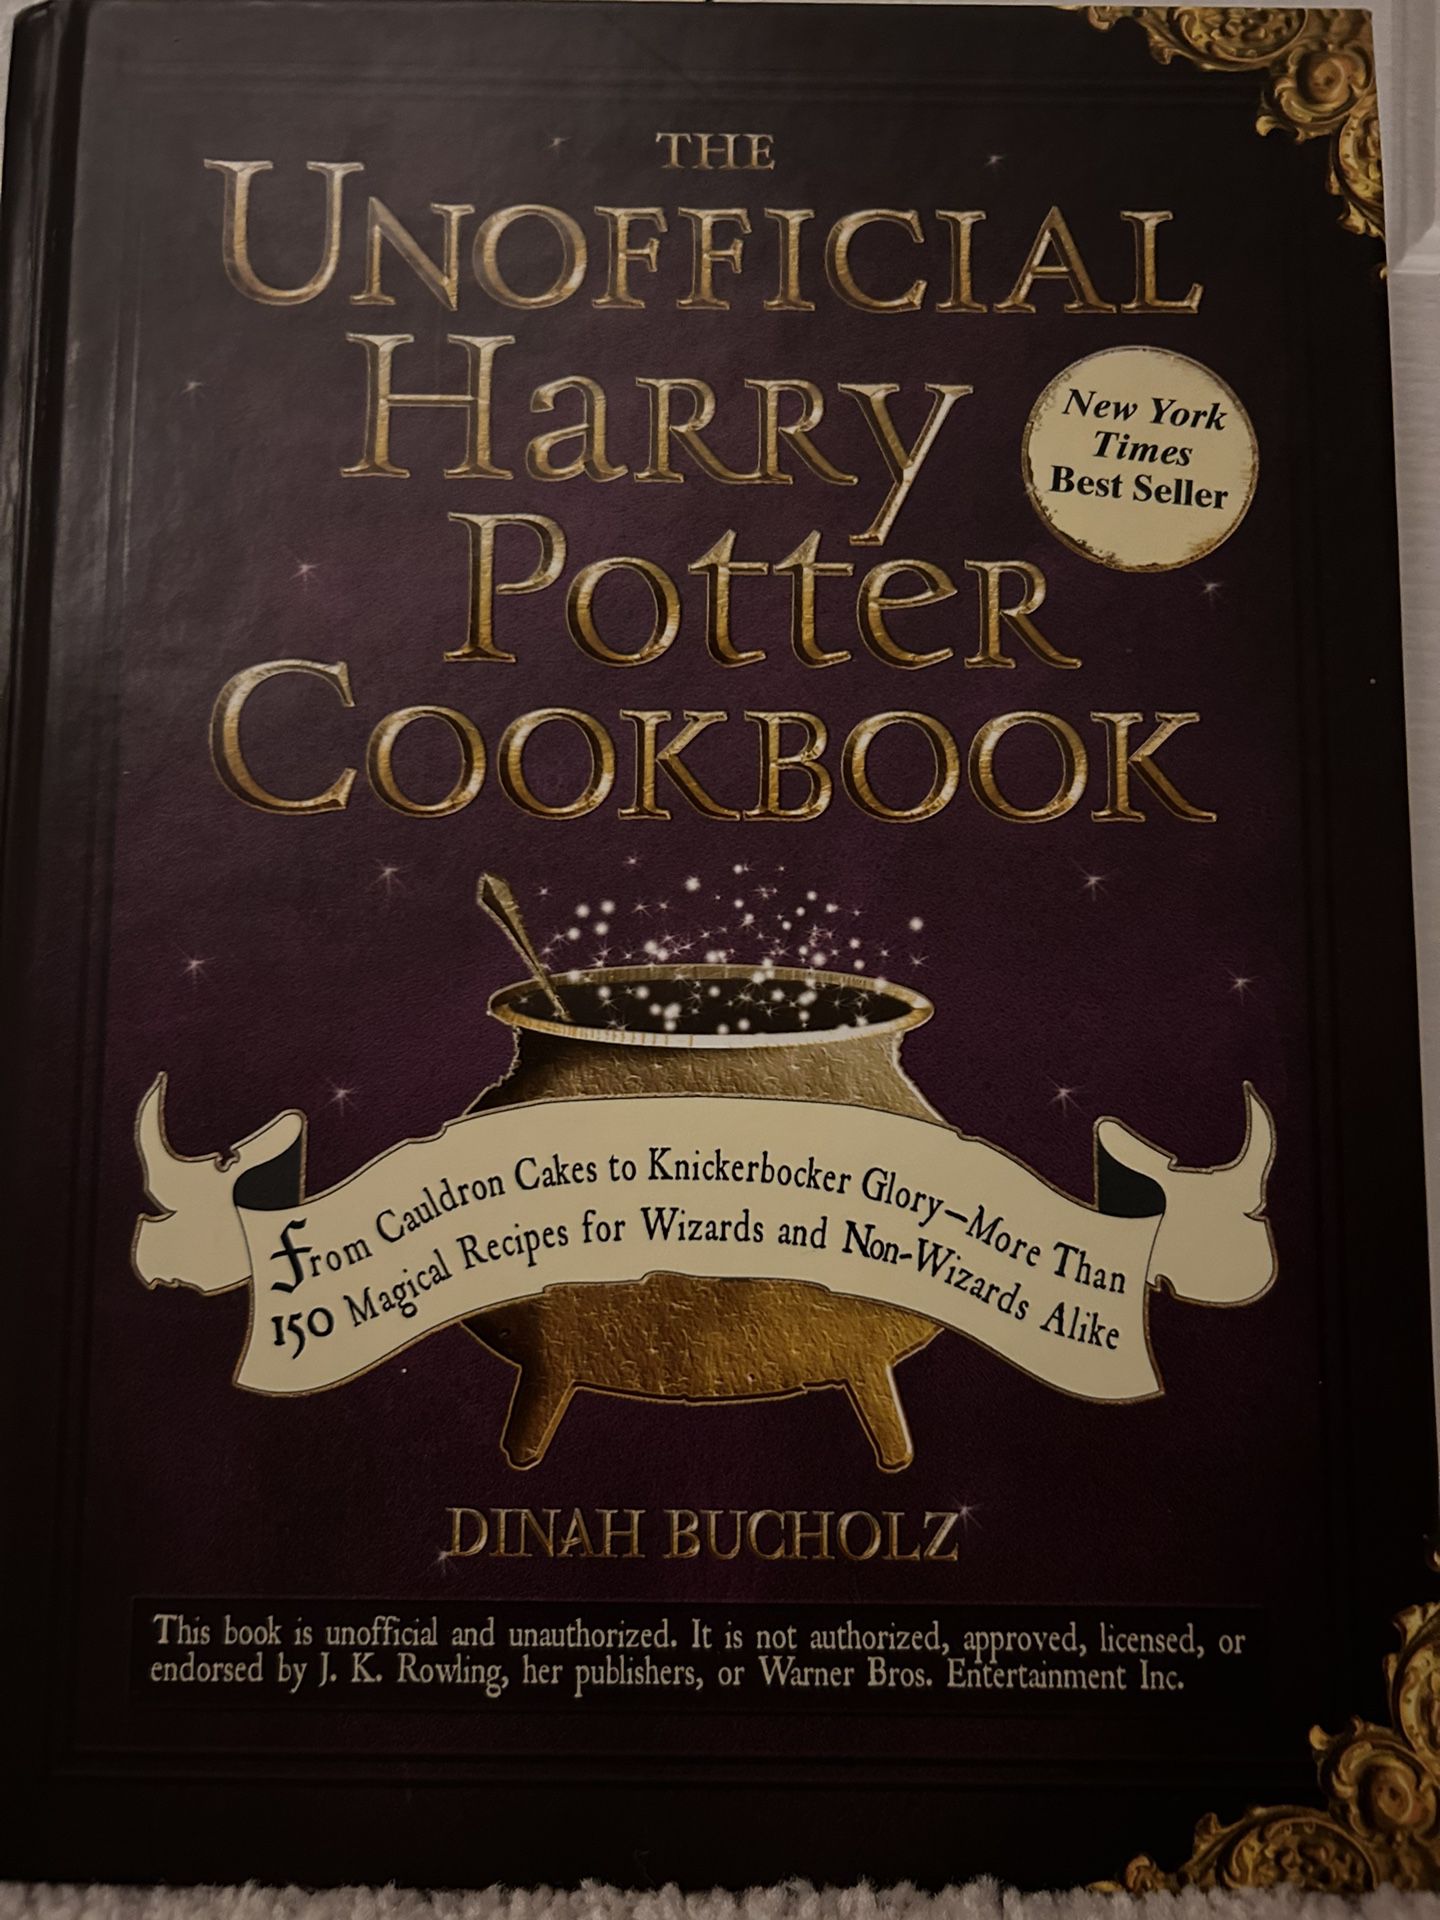 Harry Potter Cook Book